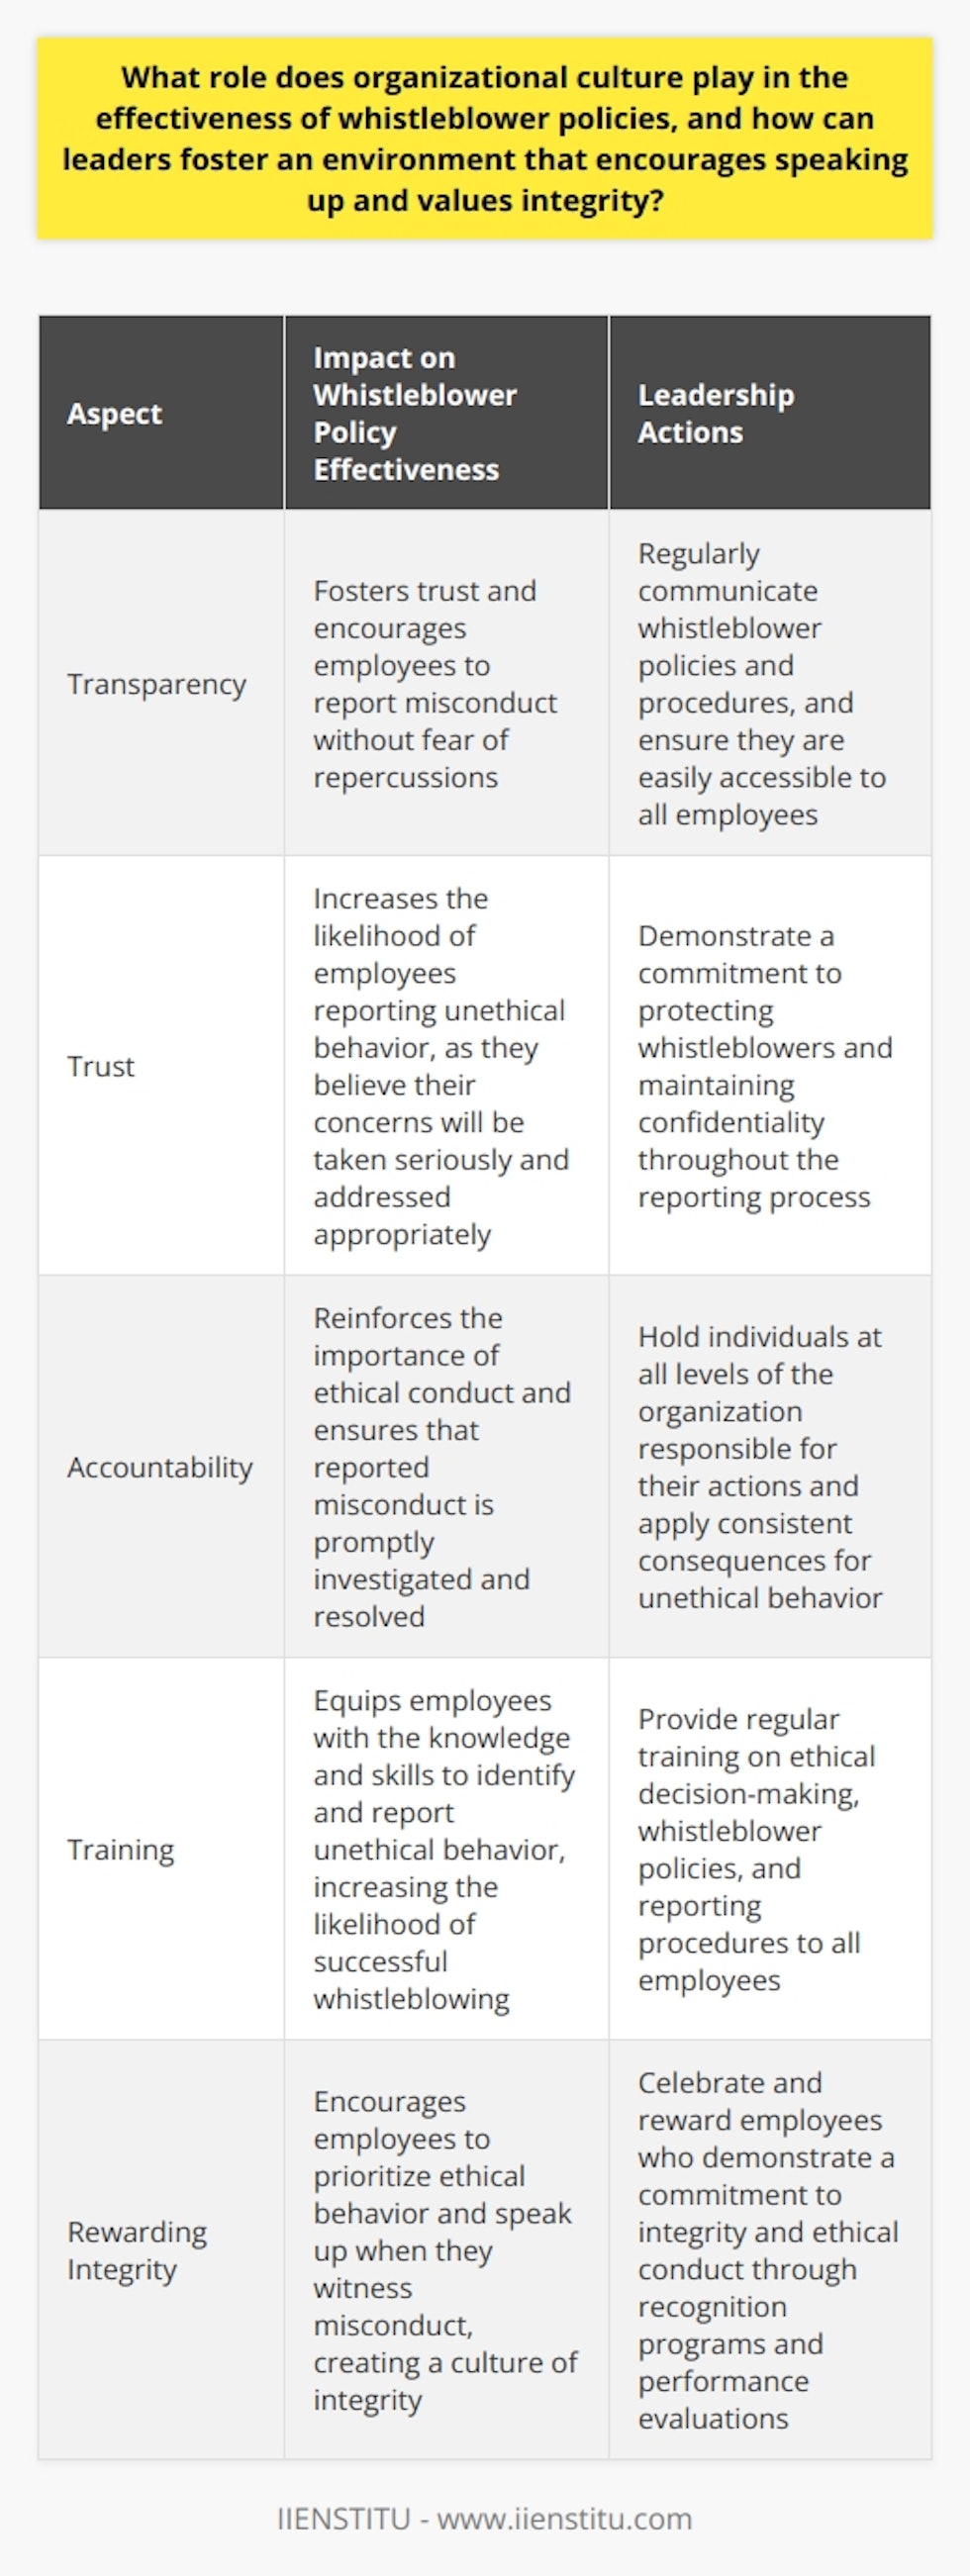 Organizational culture plays a critical role in the effectiveness of whistleblower policies. Leaders must create a culture of transparency, trust, and accountability, where employees feel comfortable speaking up without fear of retaliation. This can be achieved through regular communication, training, and modeling of ethical behavior by leadership. Organizations should also celebrate and reward employees who demonstrate a commitment to integrity and ethical conduct.